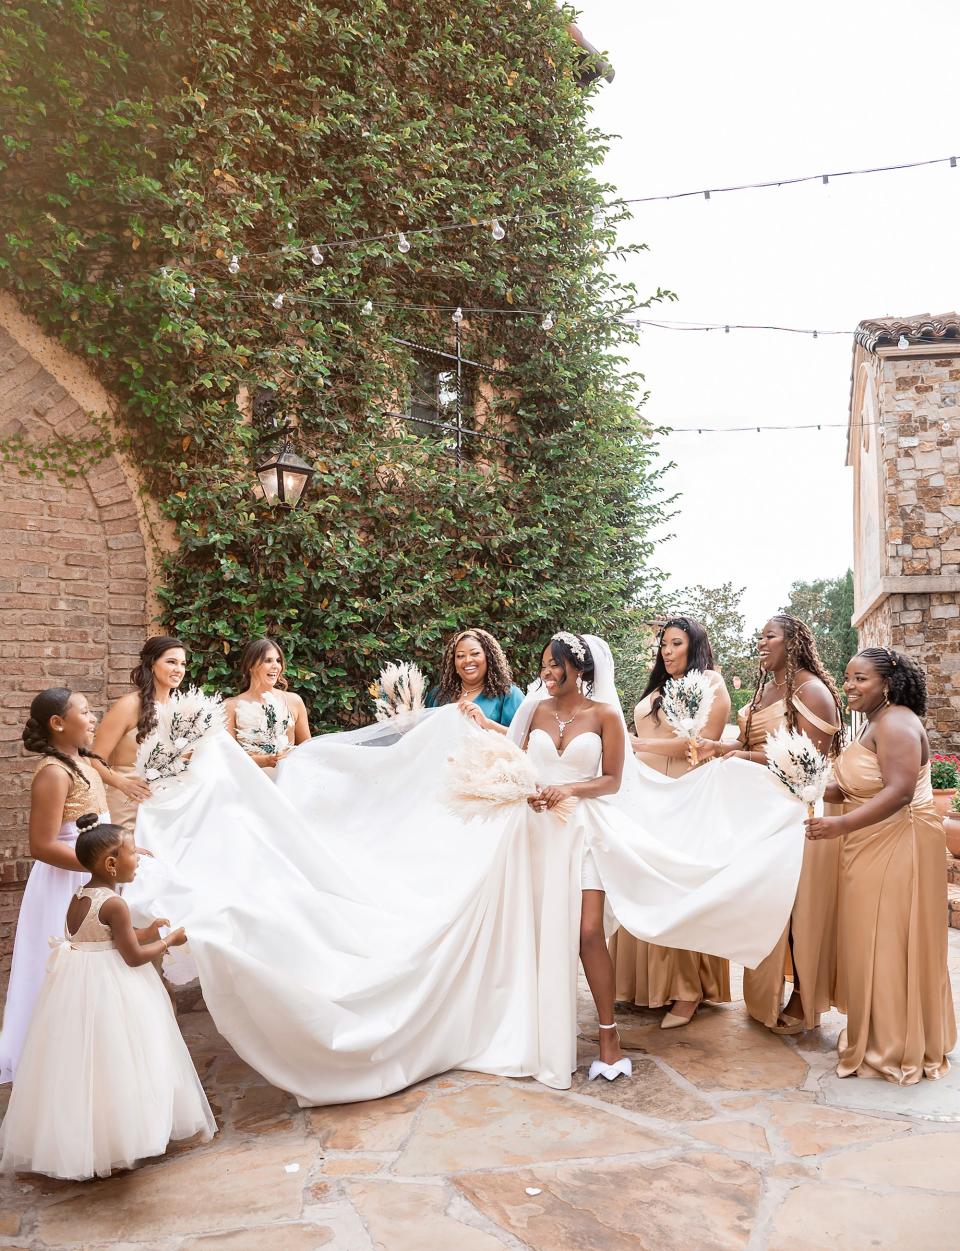 A bride stands with her bridesmaids as they adjust her dress.